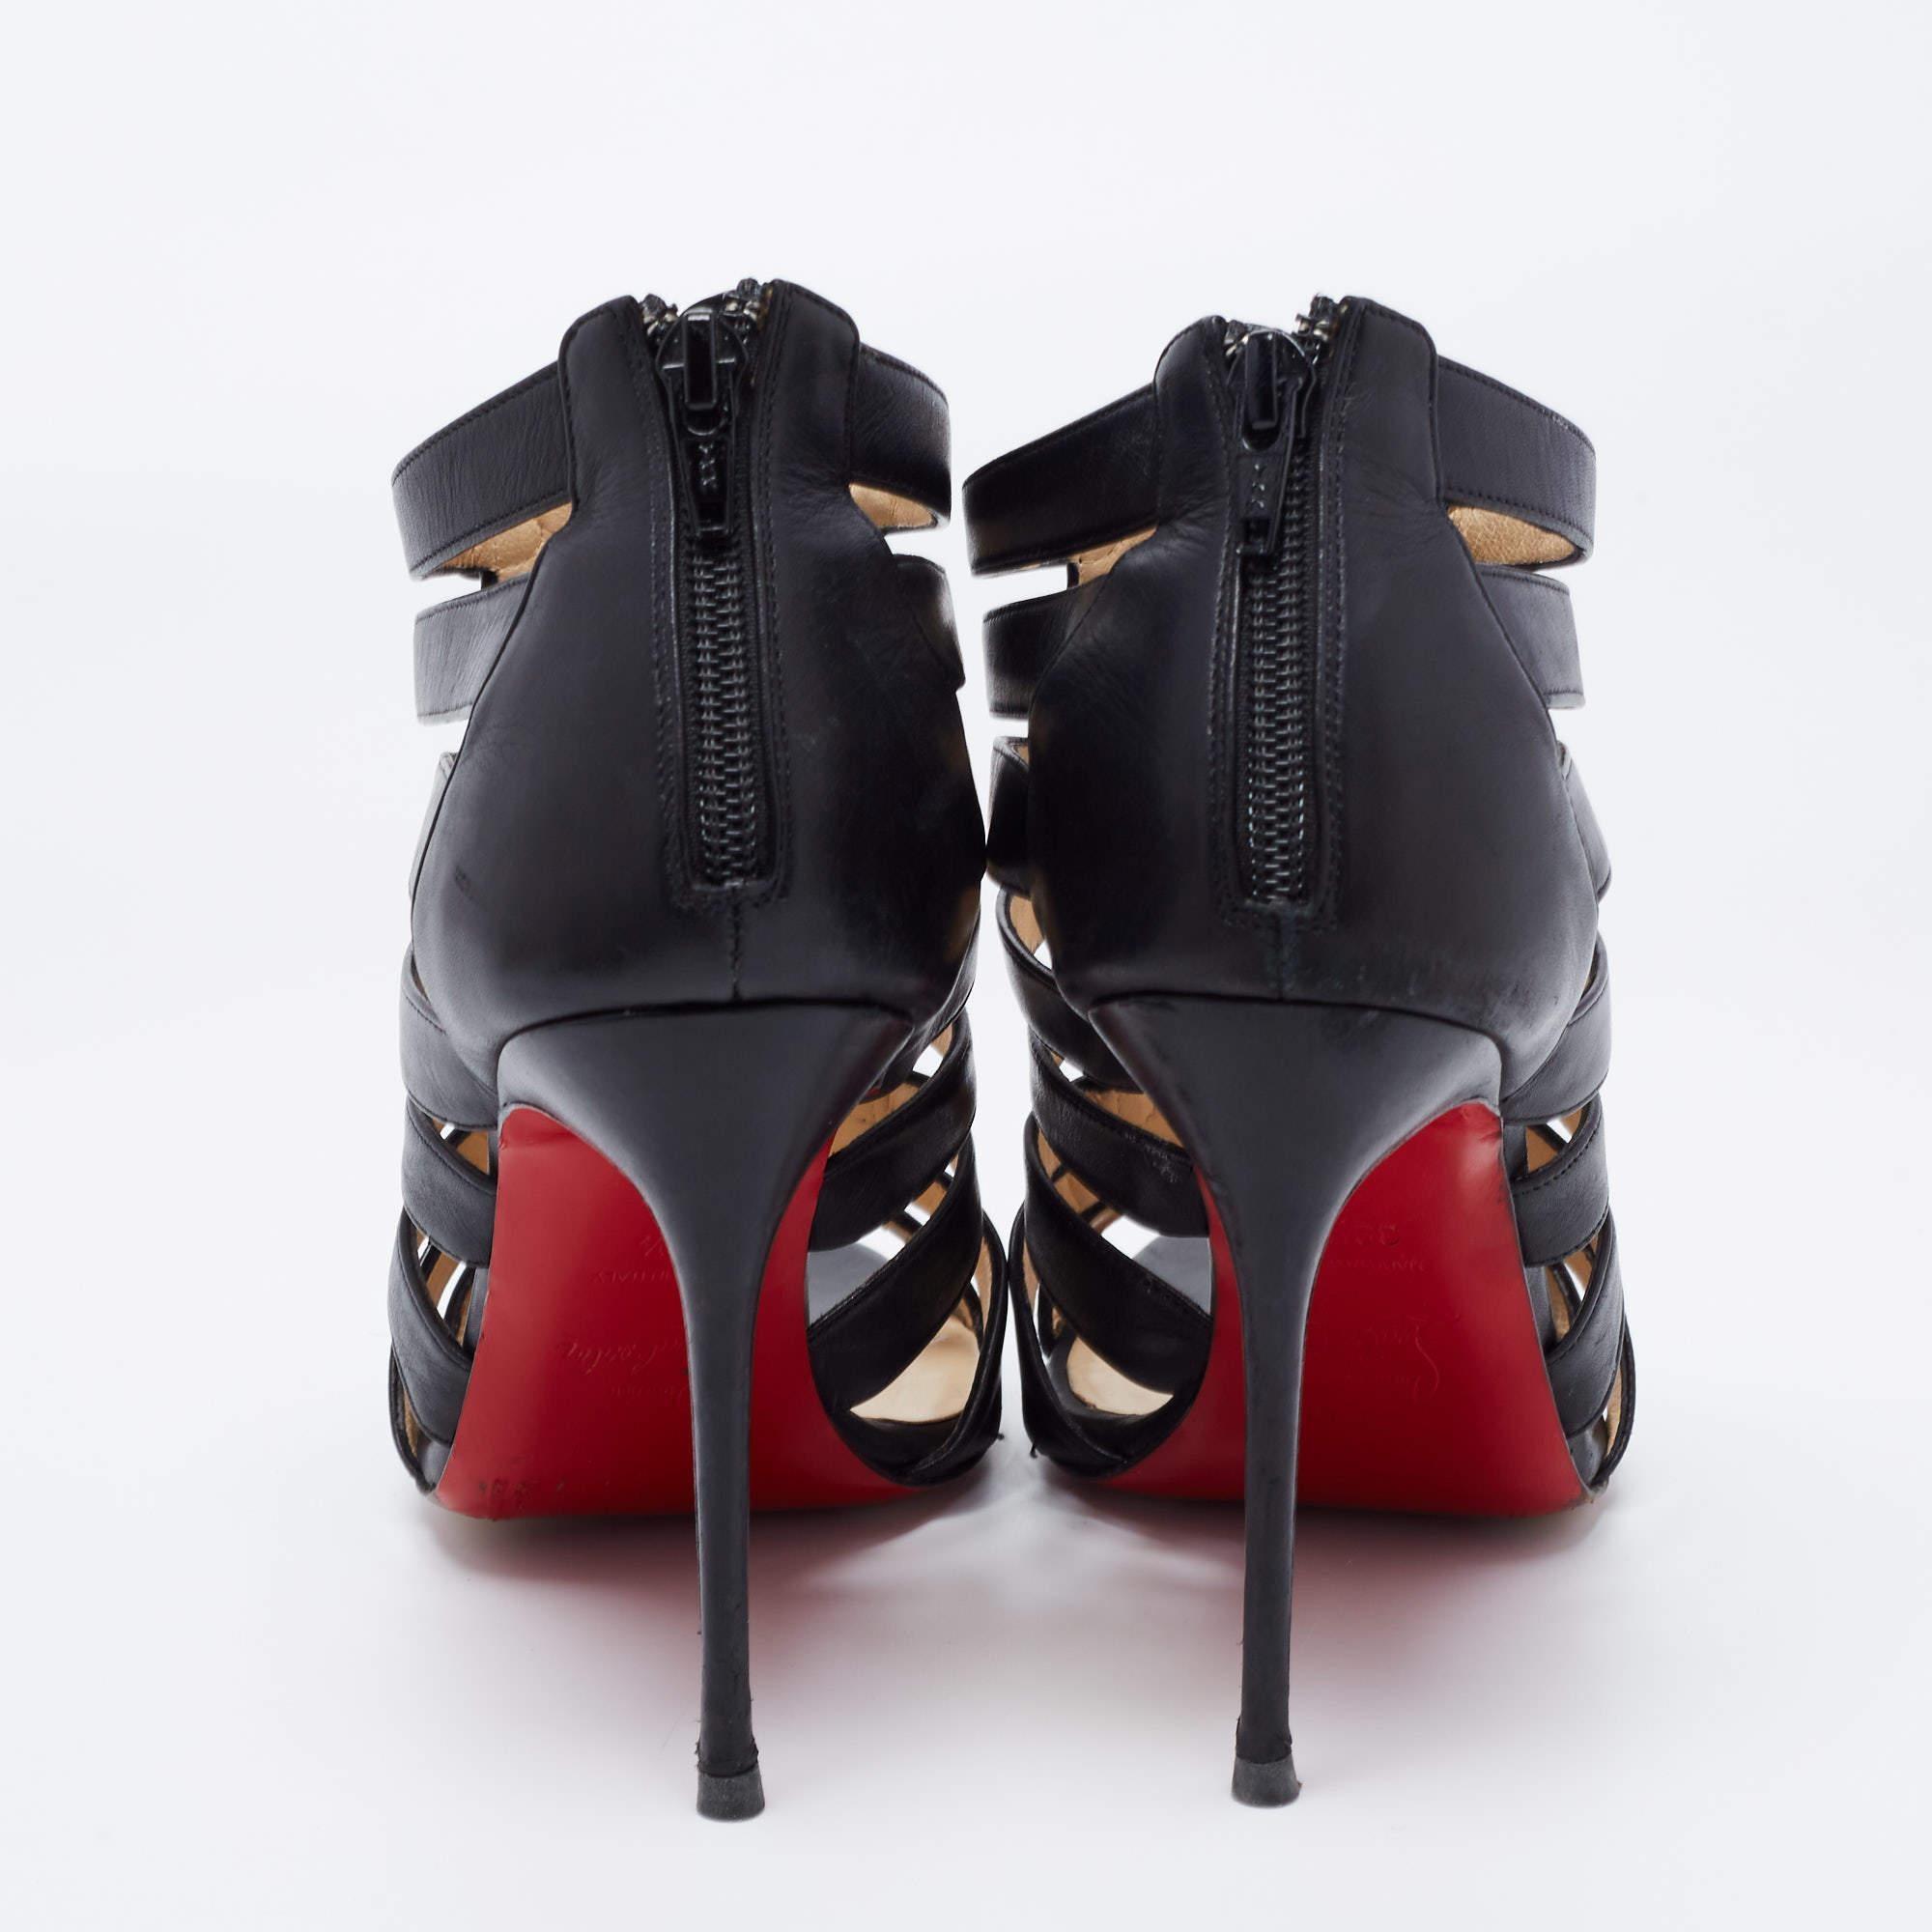 Christian Louboutin Black Leather Denis Caged Sandals Size 39.5 In Good Condition For Sale In Dubai, Al Qouz 2